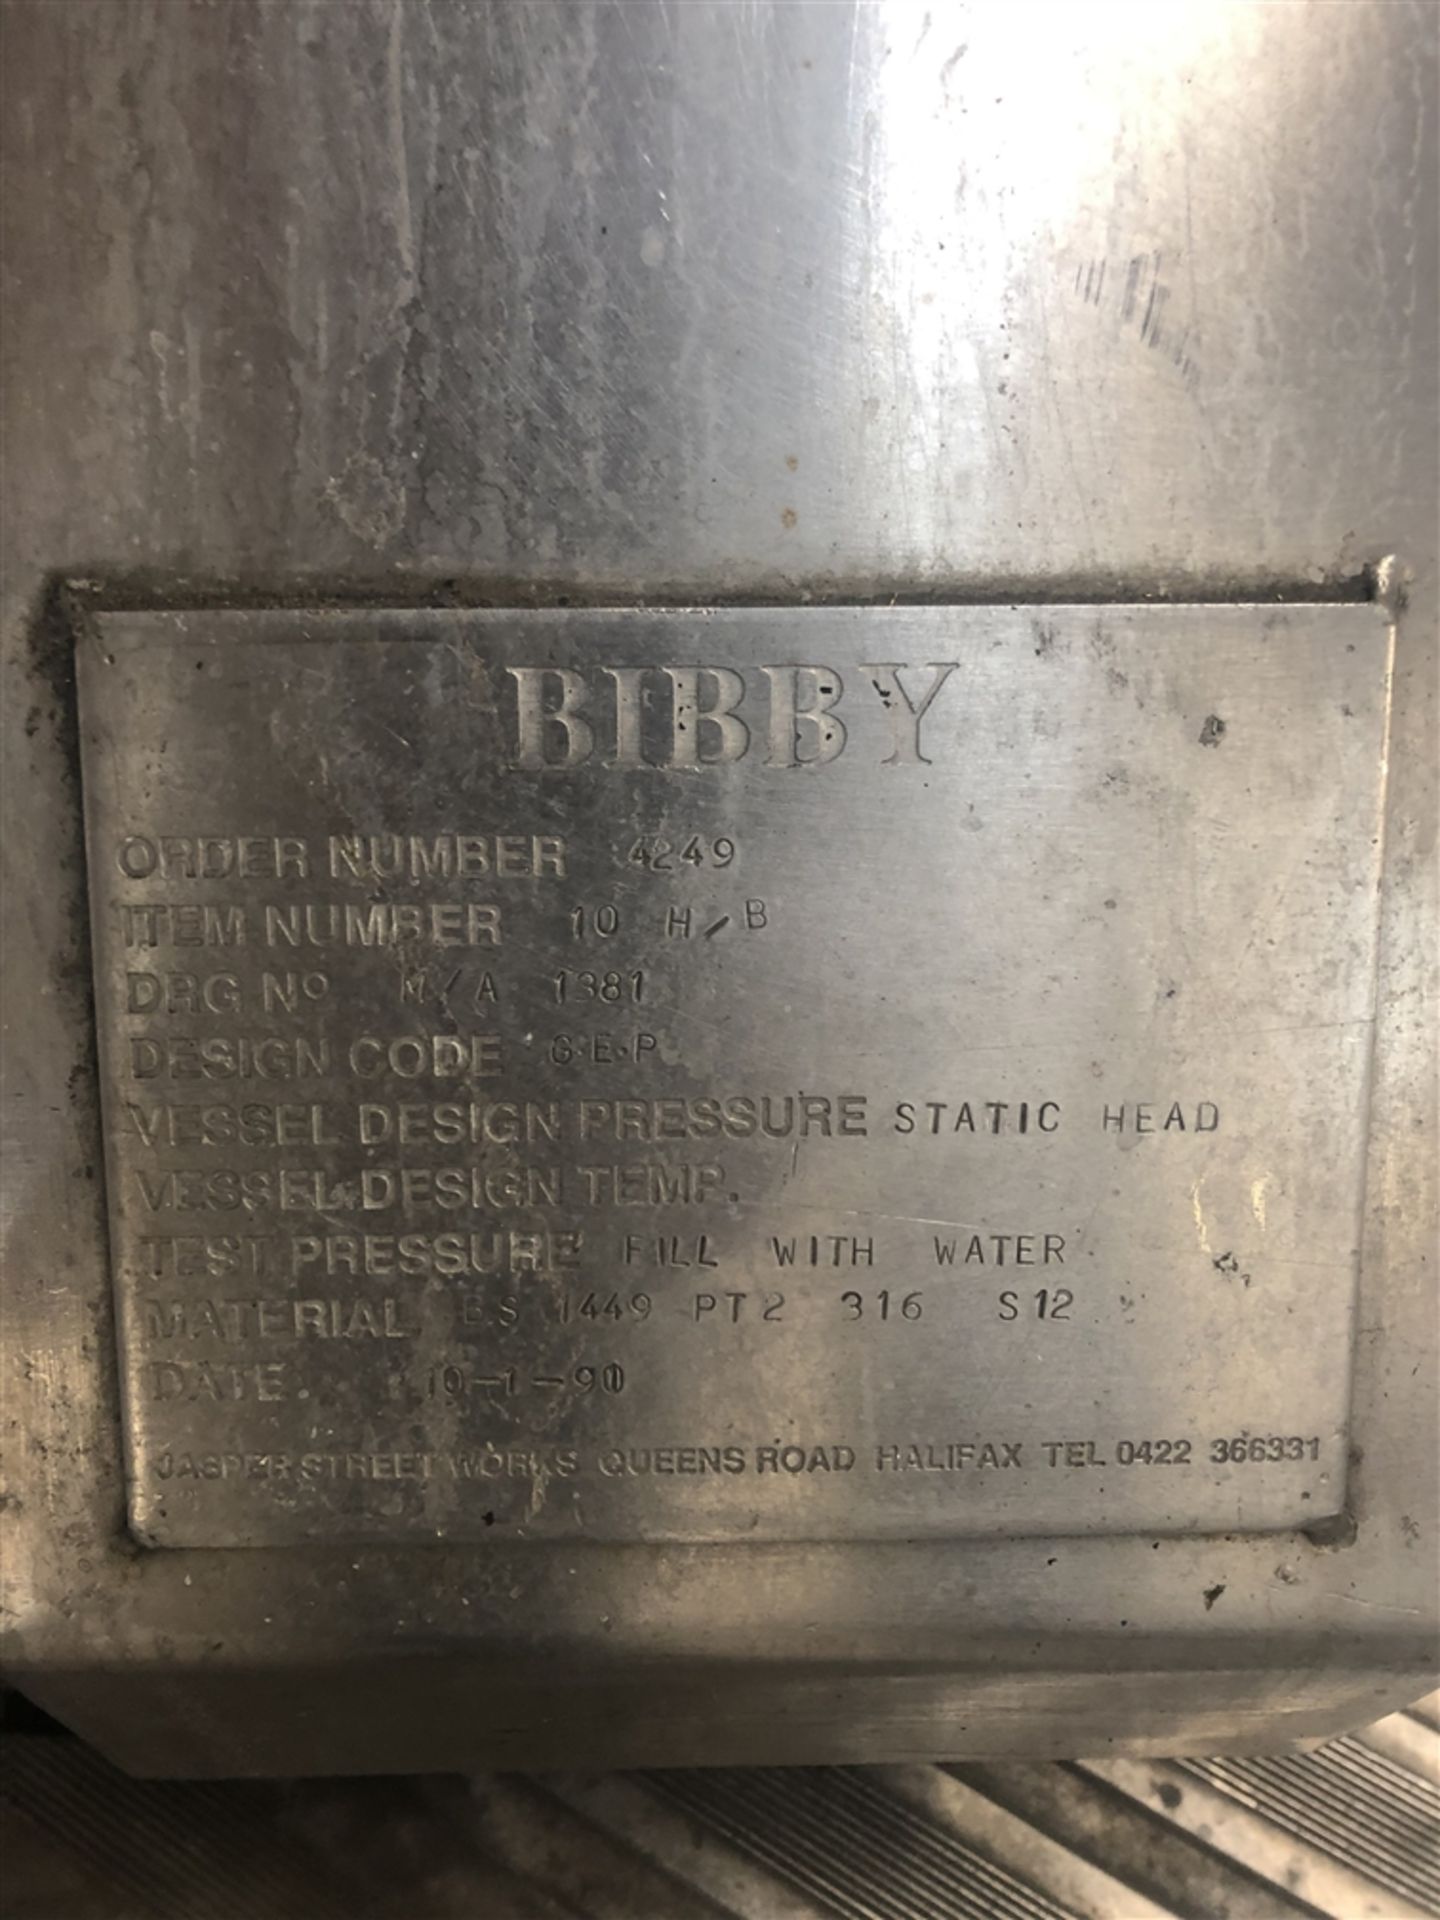 Bibby’s 2500 Litre jacketed mixing vessel with Lig - Image 5 of 6